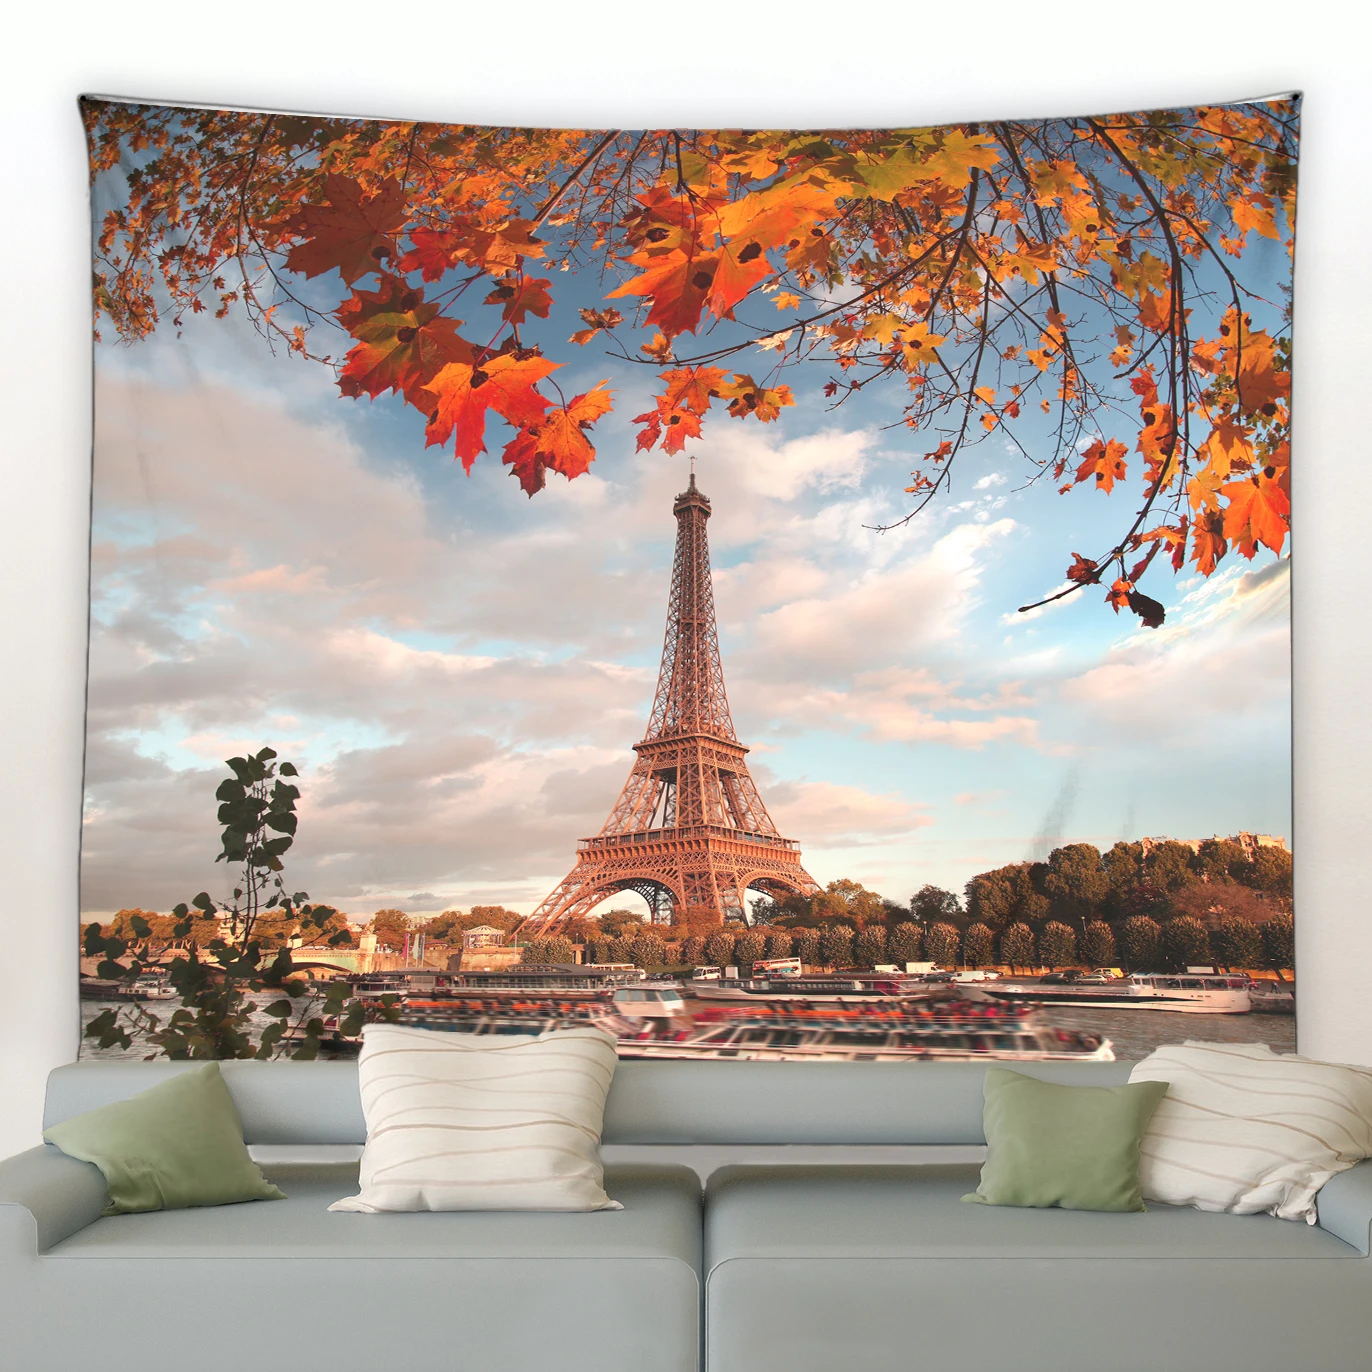 

Paris Eiffel Tower Landscape Tapestry Autumn Beautiful Natural Scenery Wall Hanging Tapestry Background Decoration